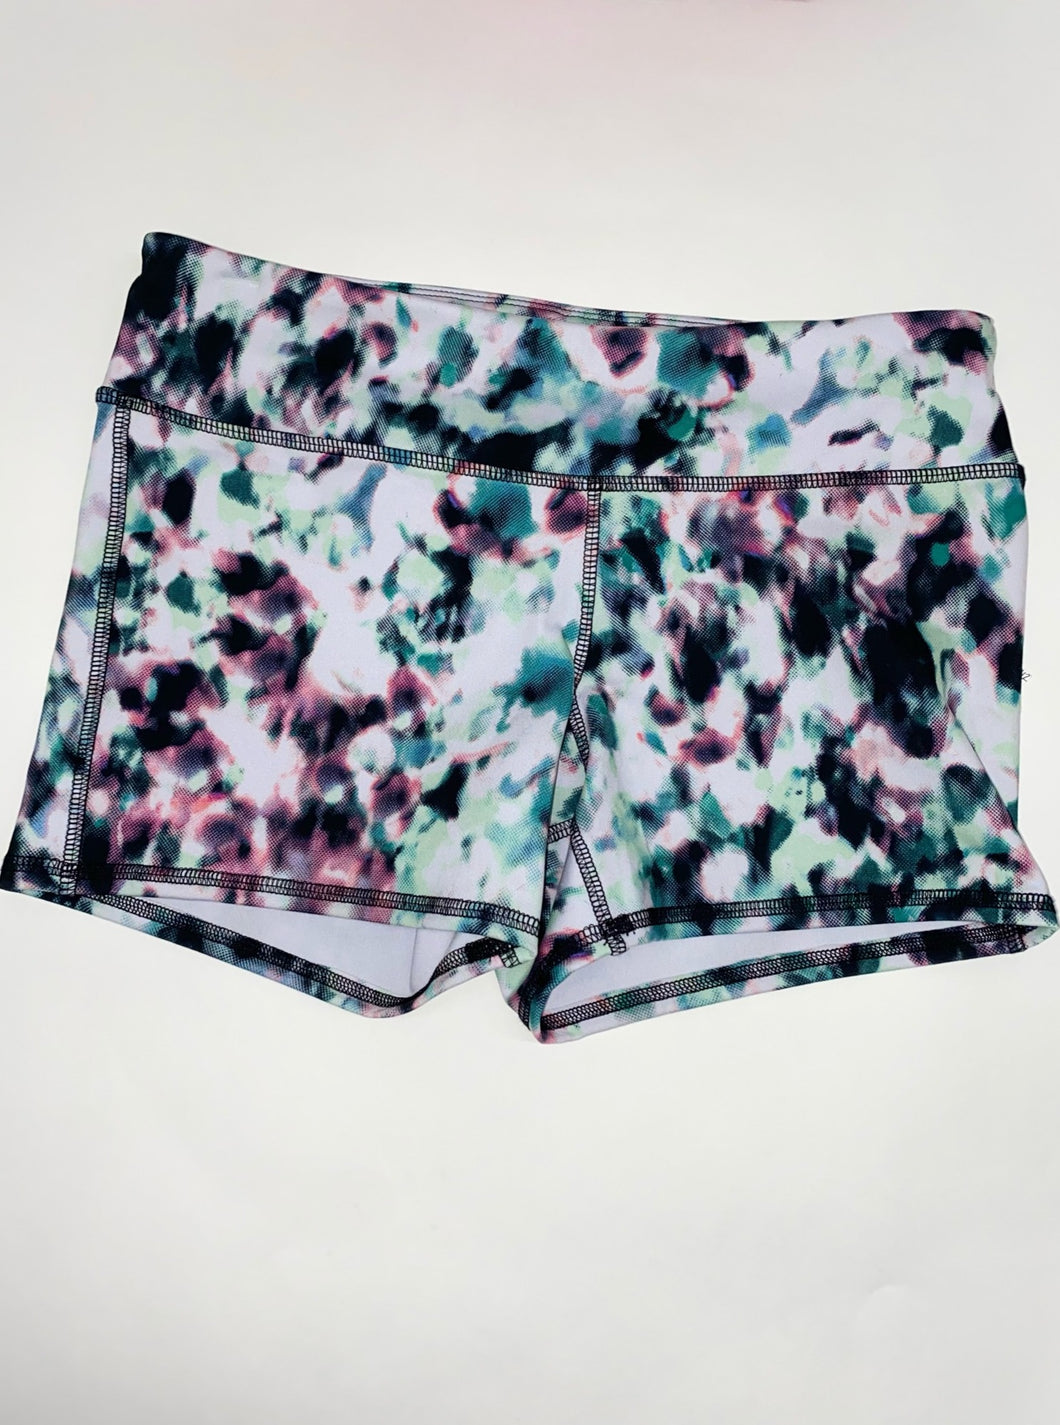 Colorful Gym Shorts (12 pack)